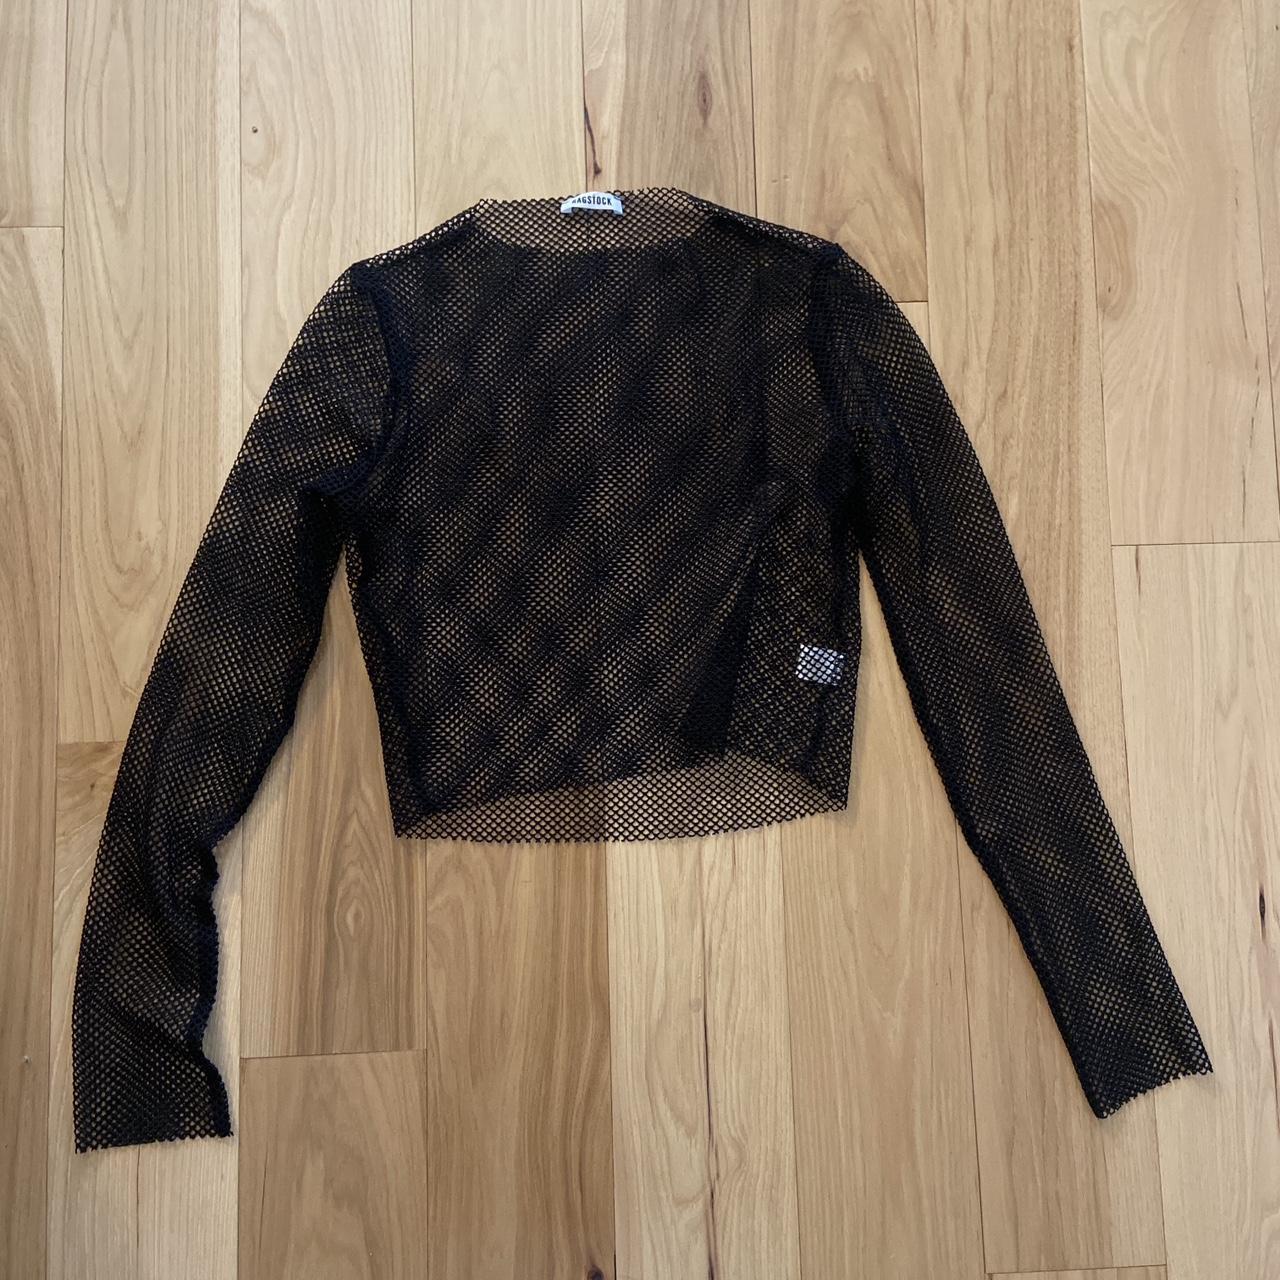 cropped long sleeve fishnet top size says L fits... - Depop